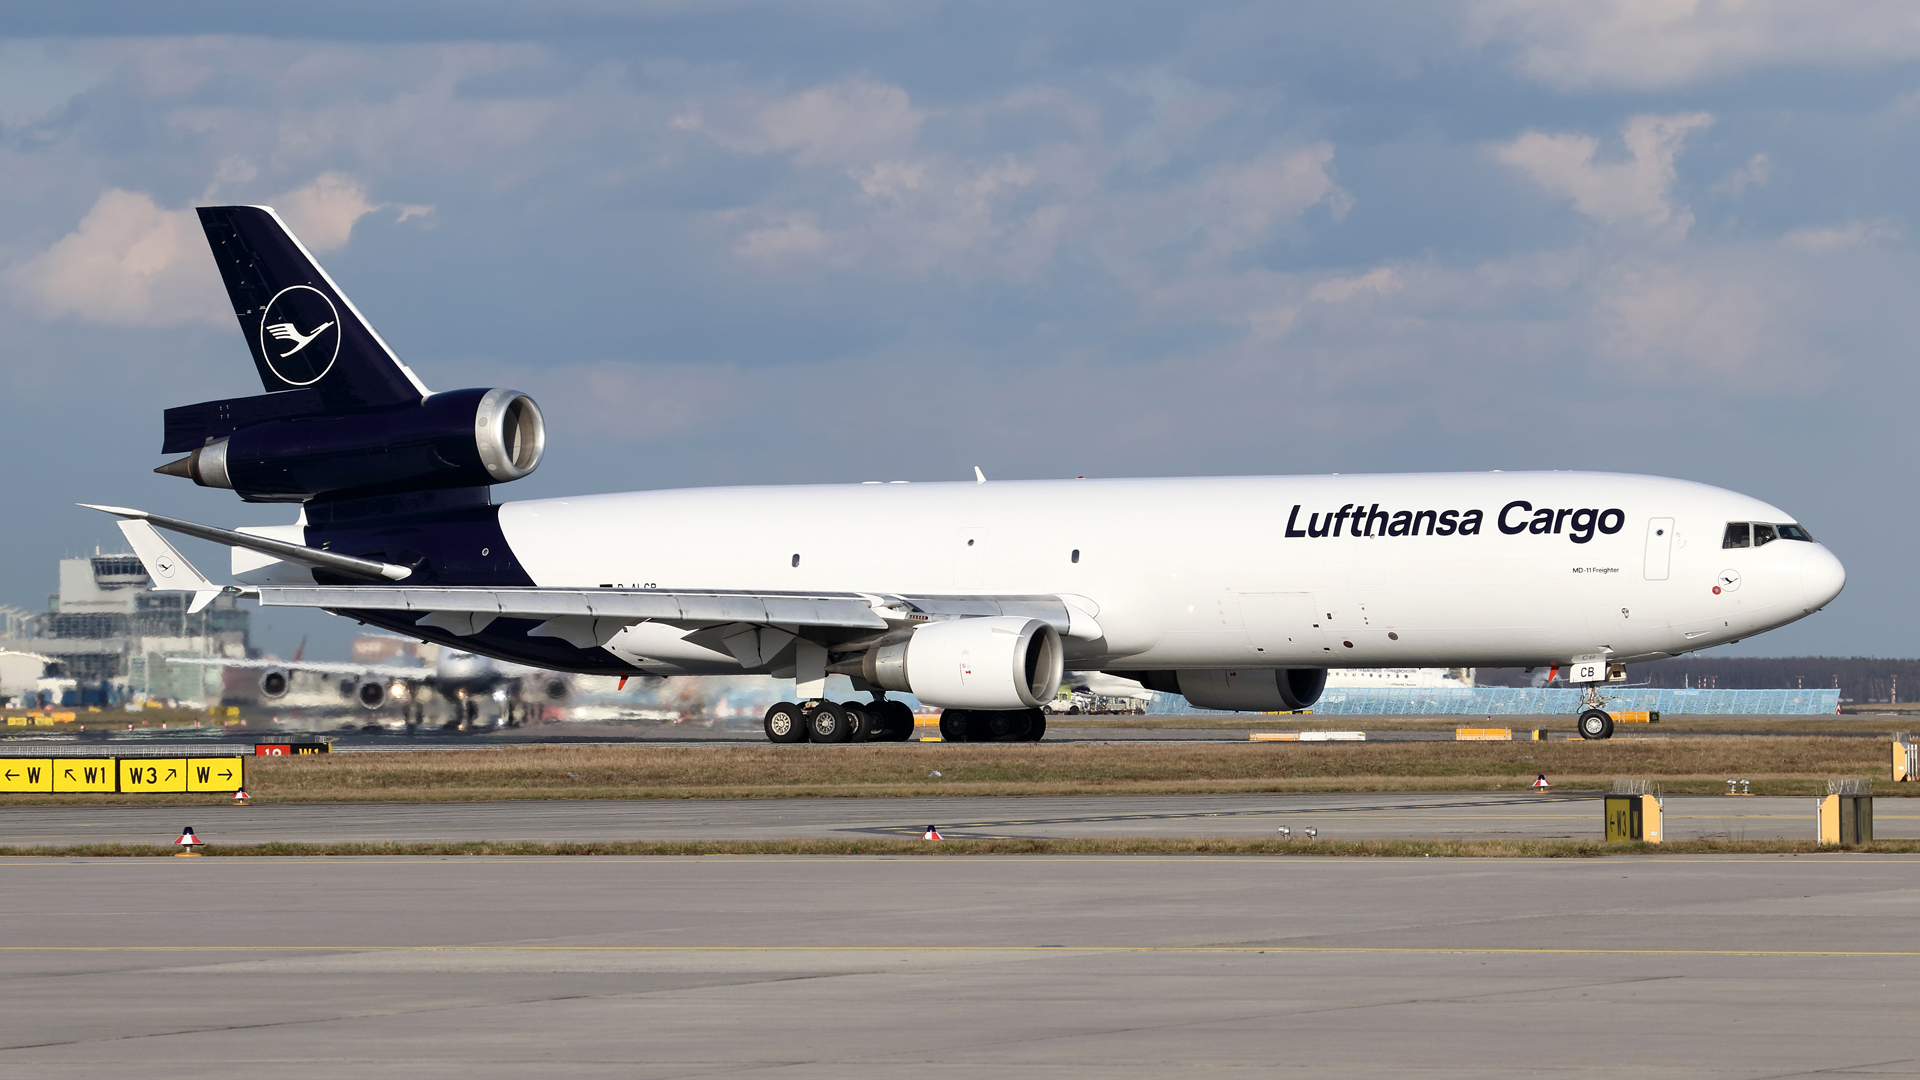 General 1920x1080 aircraft md-11 cargo runway Lufthansa vehicle airline American aircraft